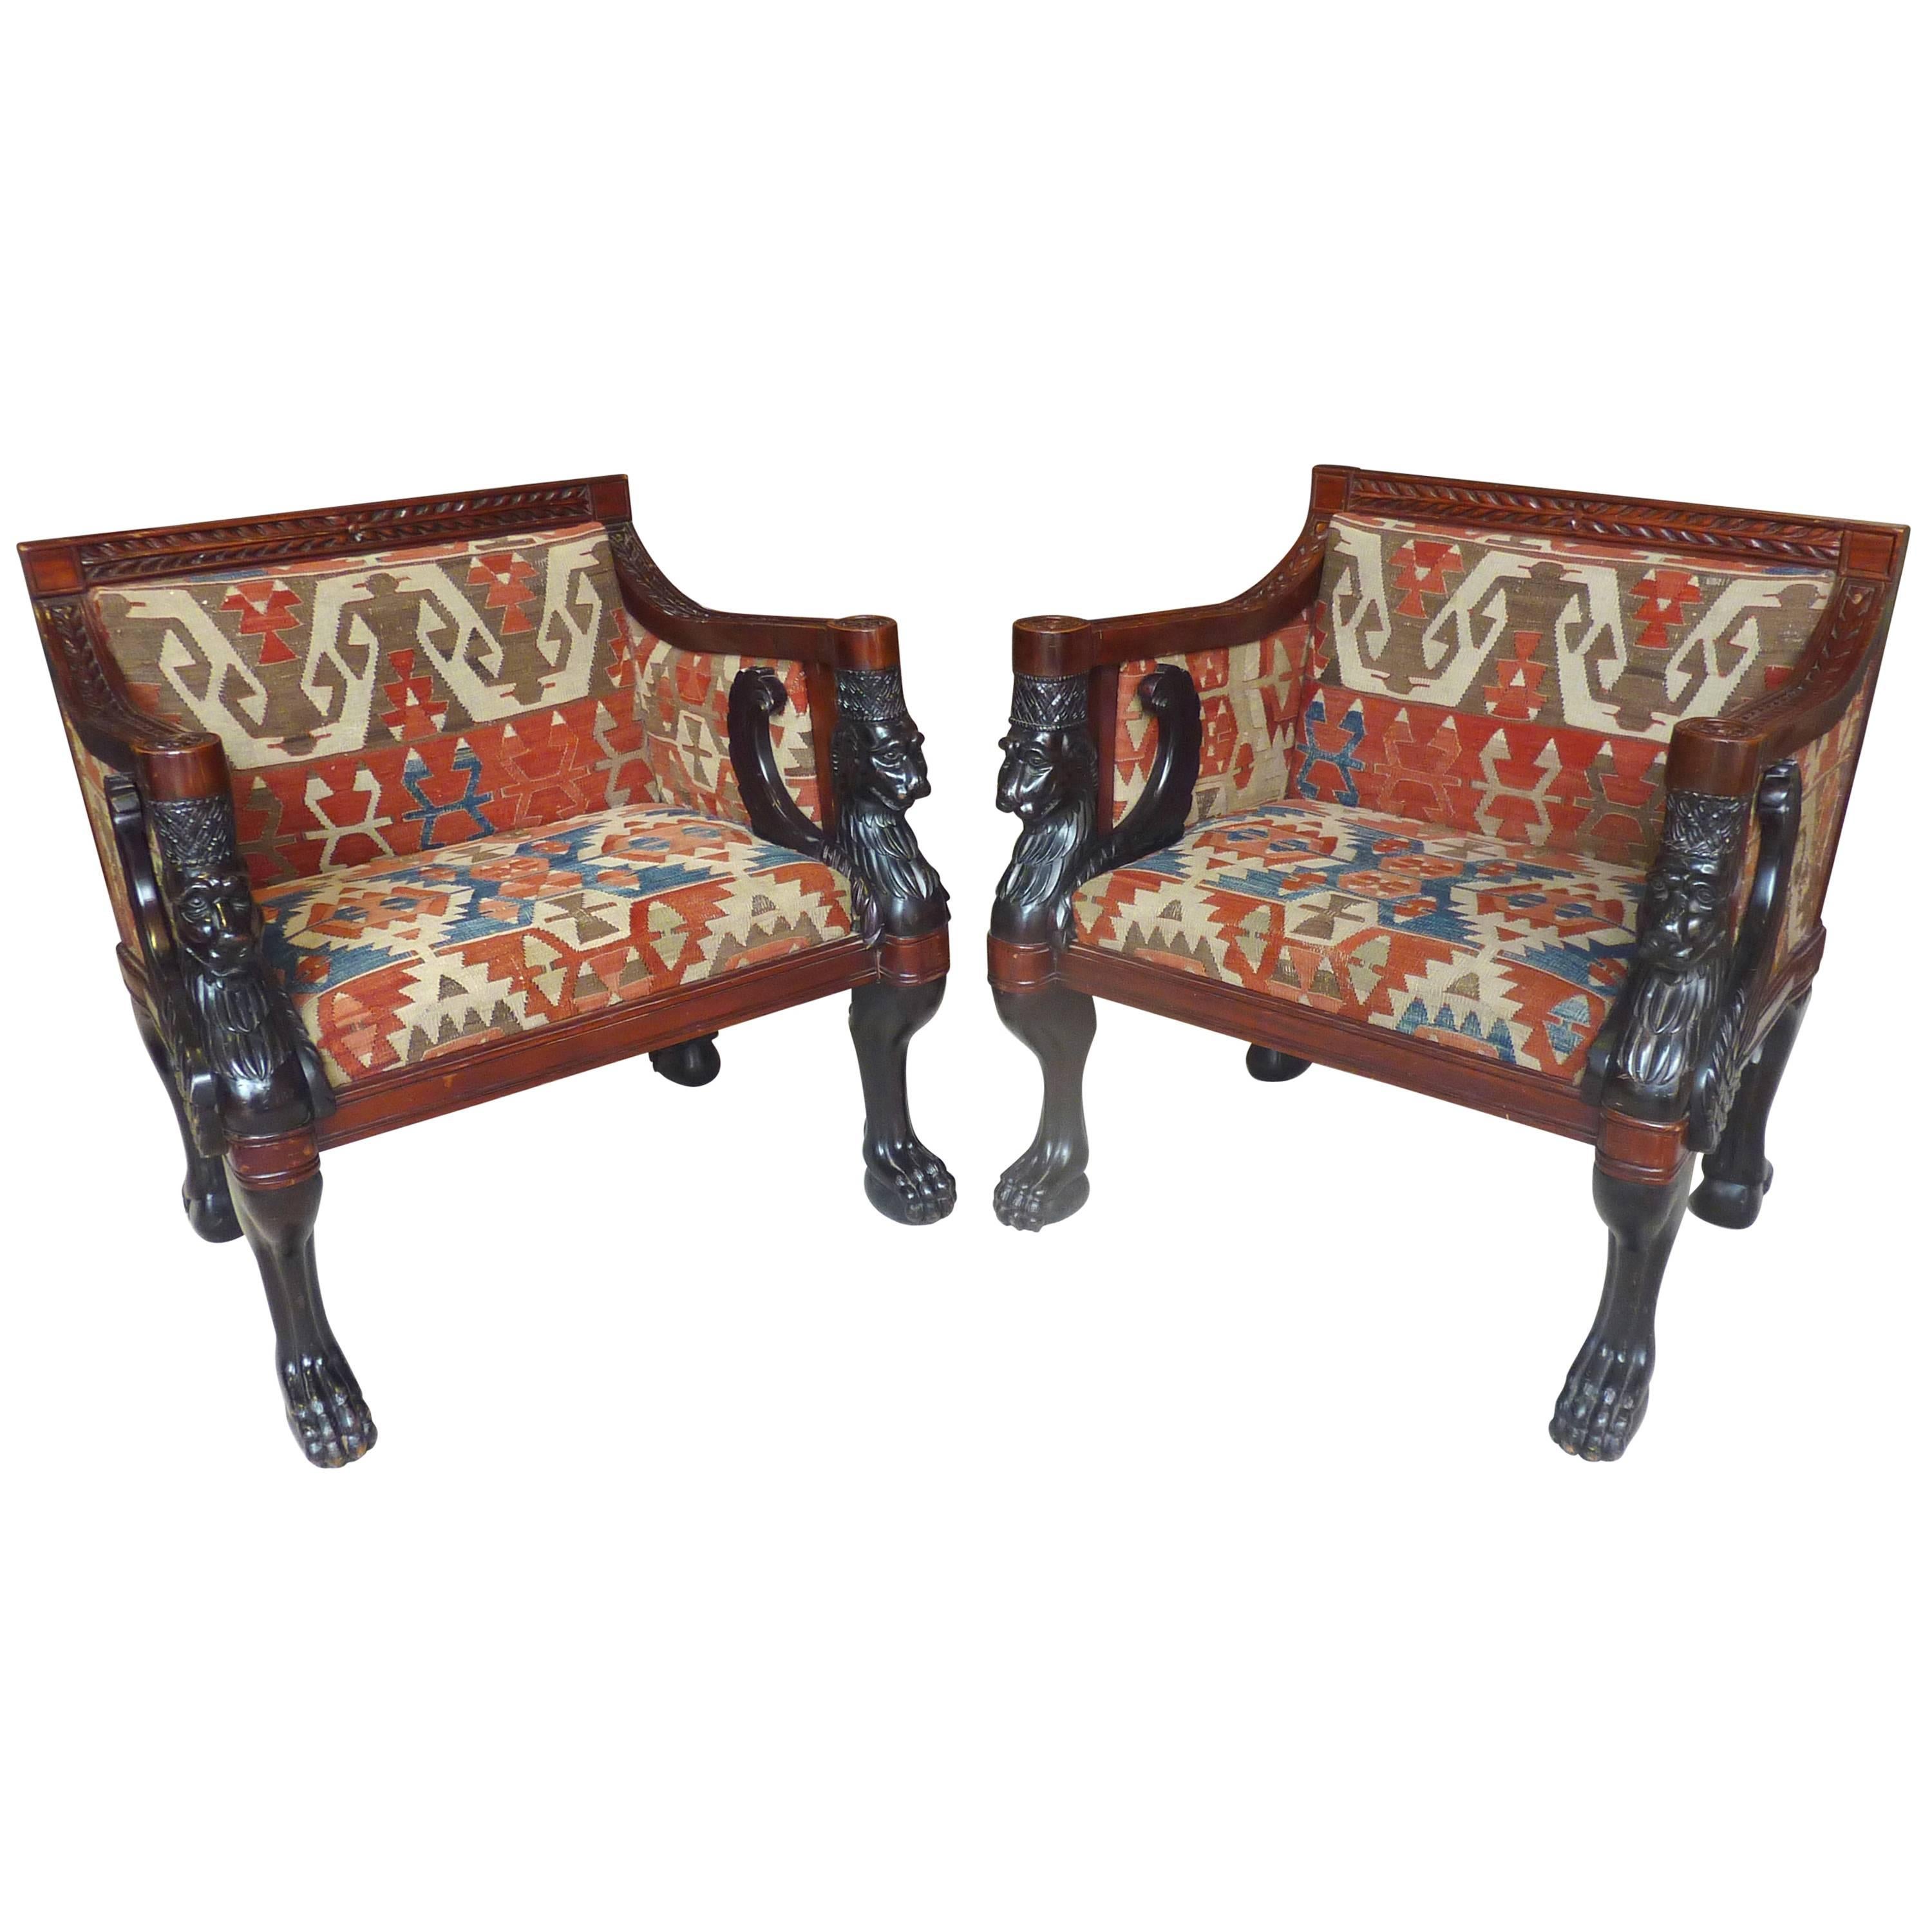 Pair of Egyptian Revival Comfortable Armchairs with Antique Anatolian Kilim